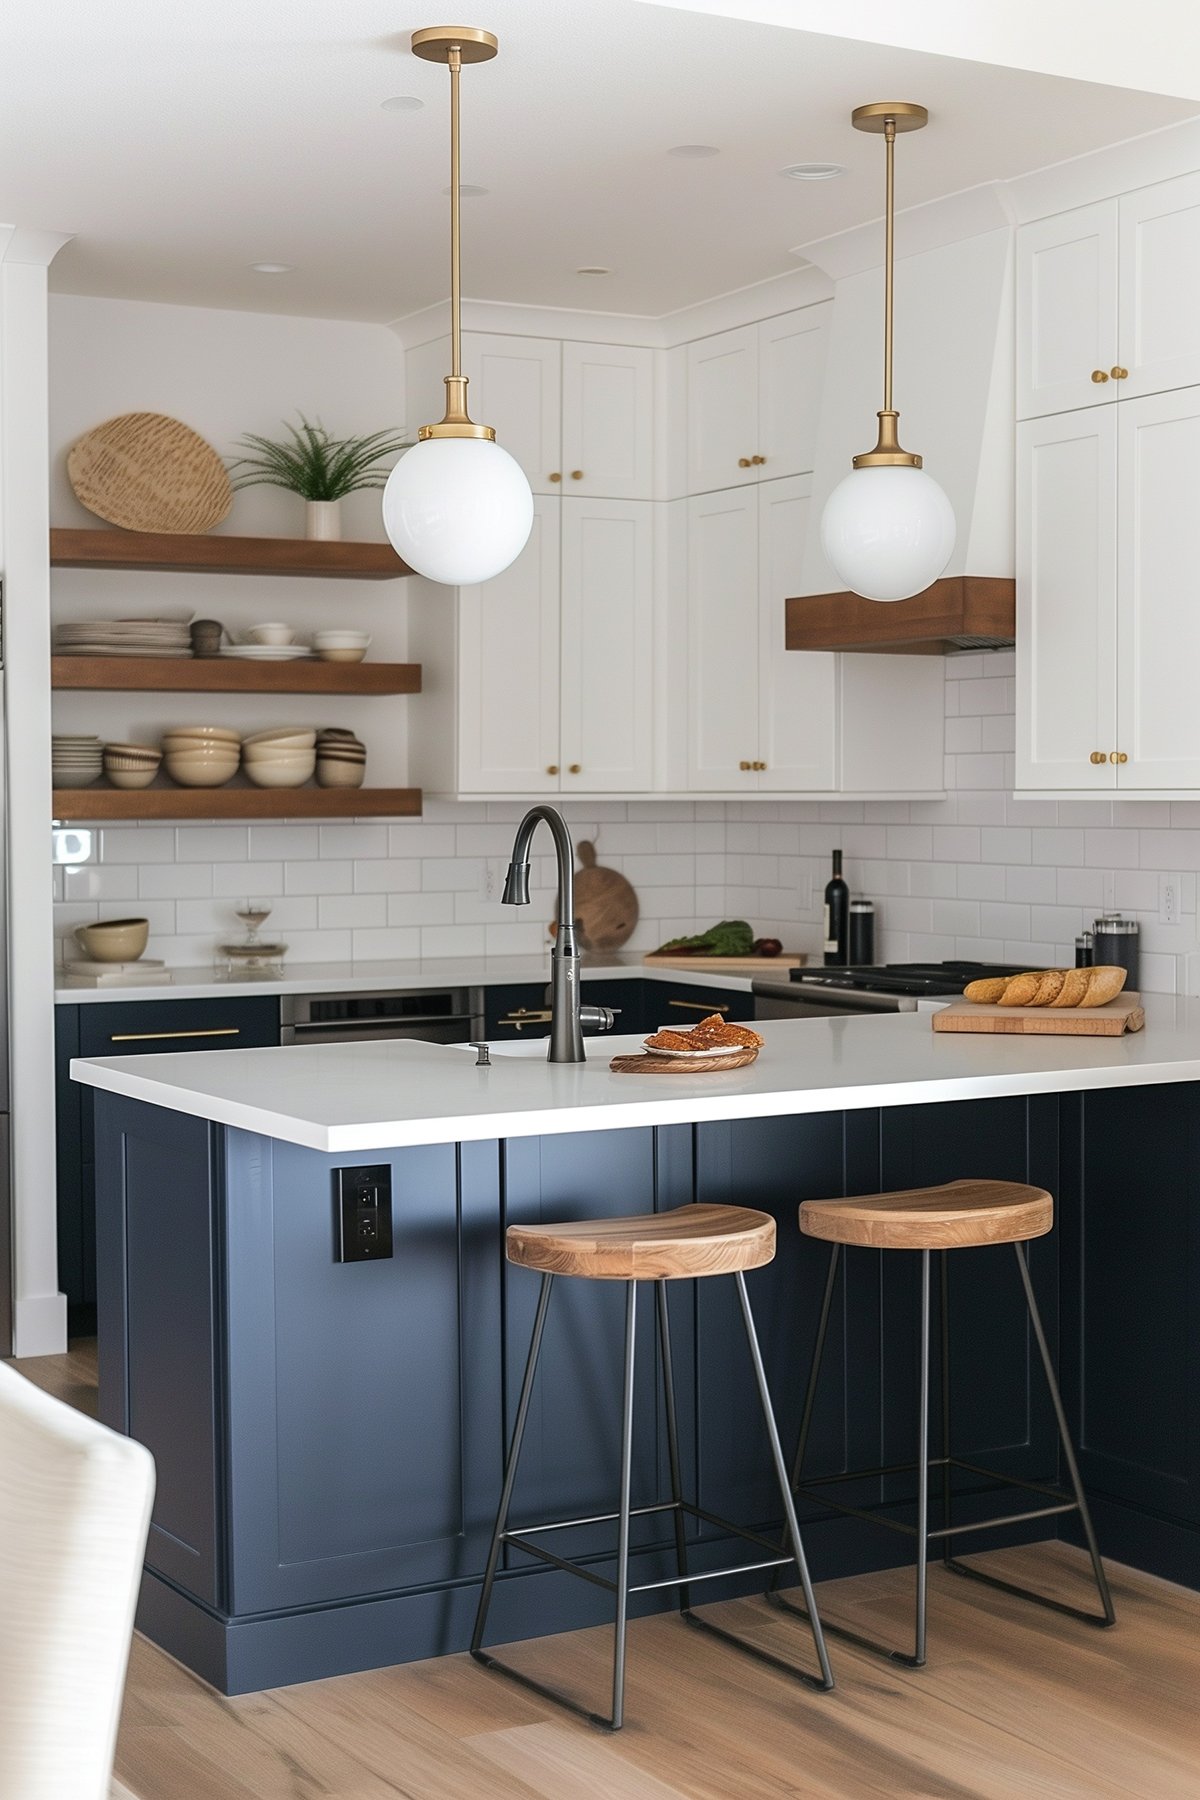 Small kitchen with white upper cabinets and navy lowers.